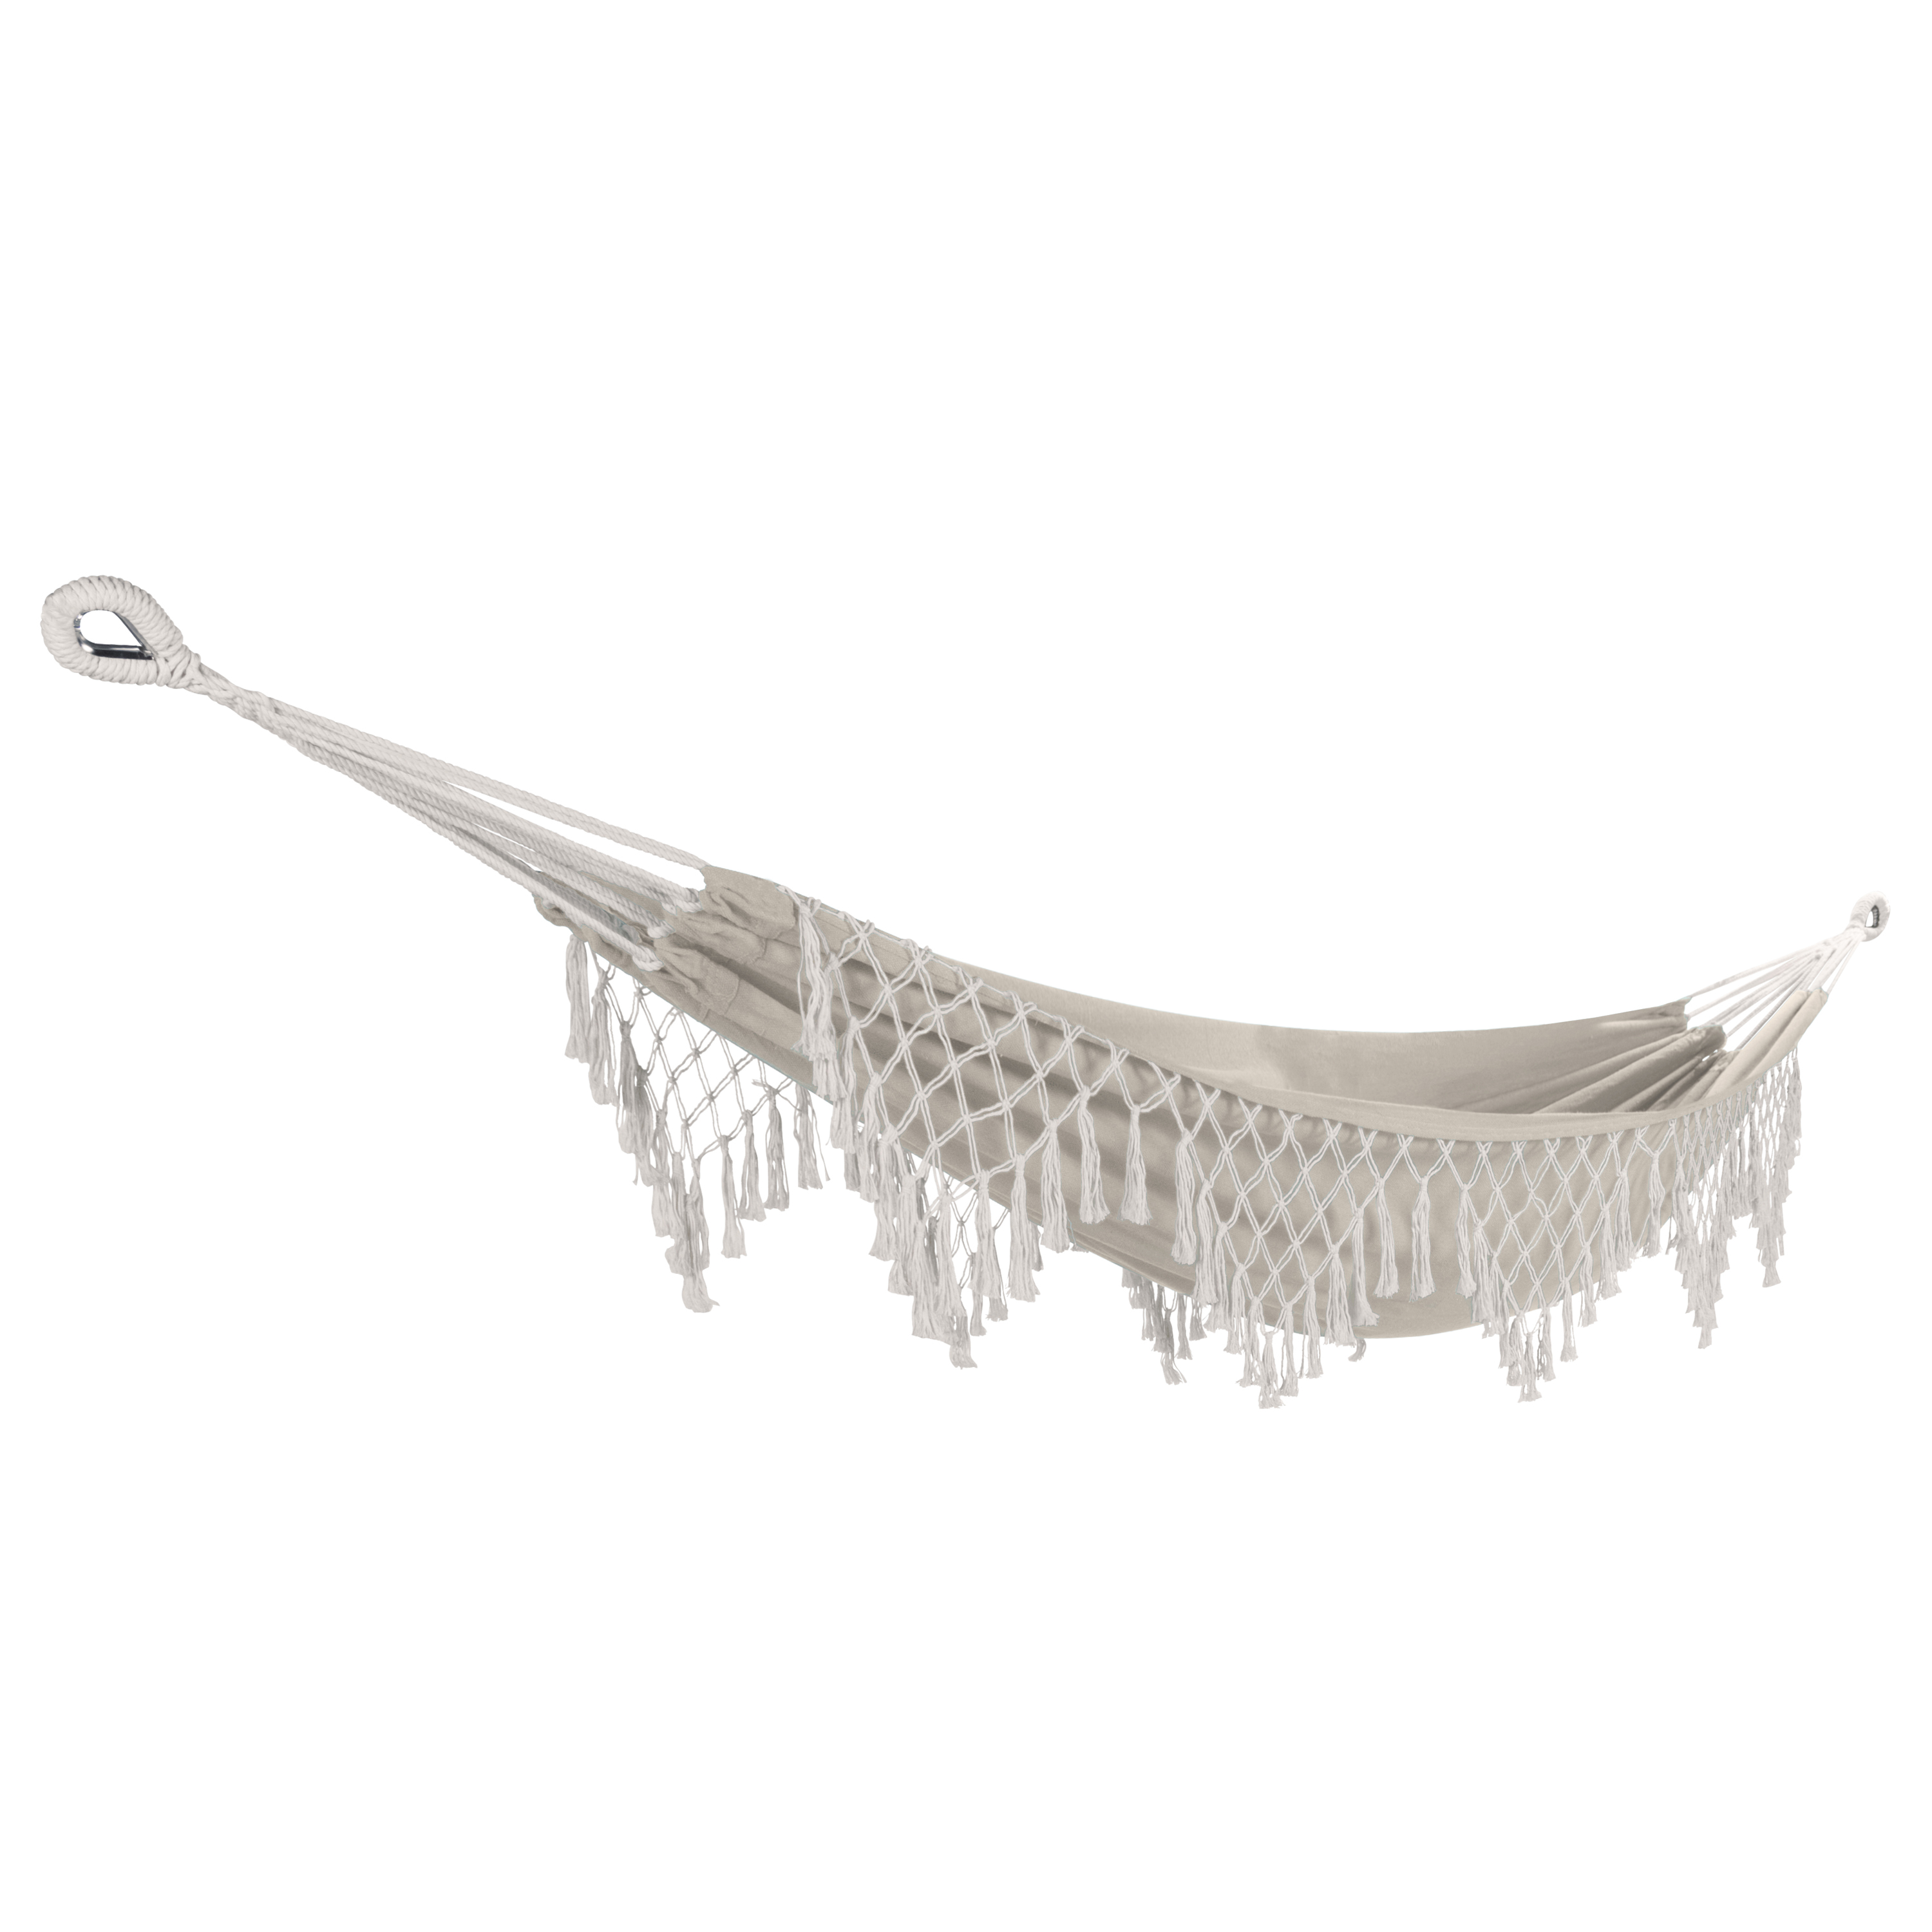 Bliss Hammocks 40” Wide Brazilian Style Hammock in a Bag with Decorative Fringe & Hanging Hardware, 250 lb. Capacity - image 1 of 19